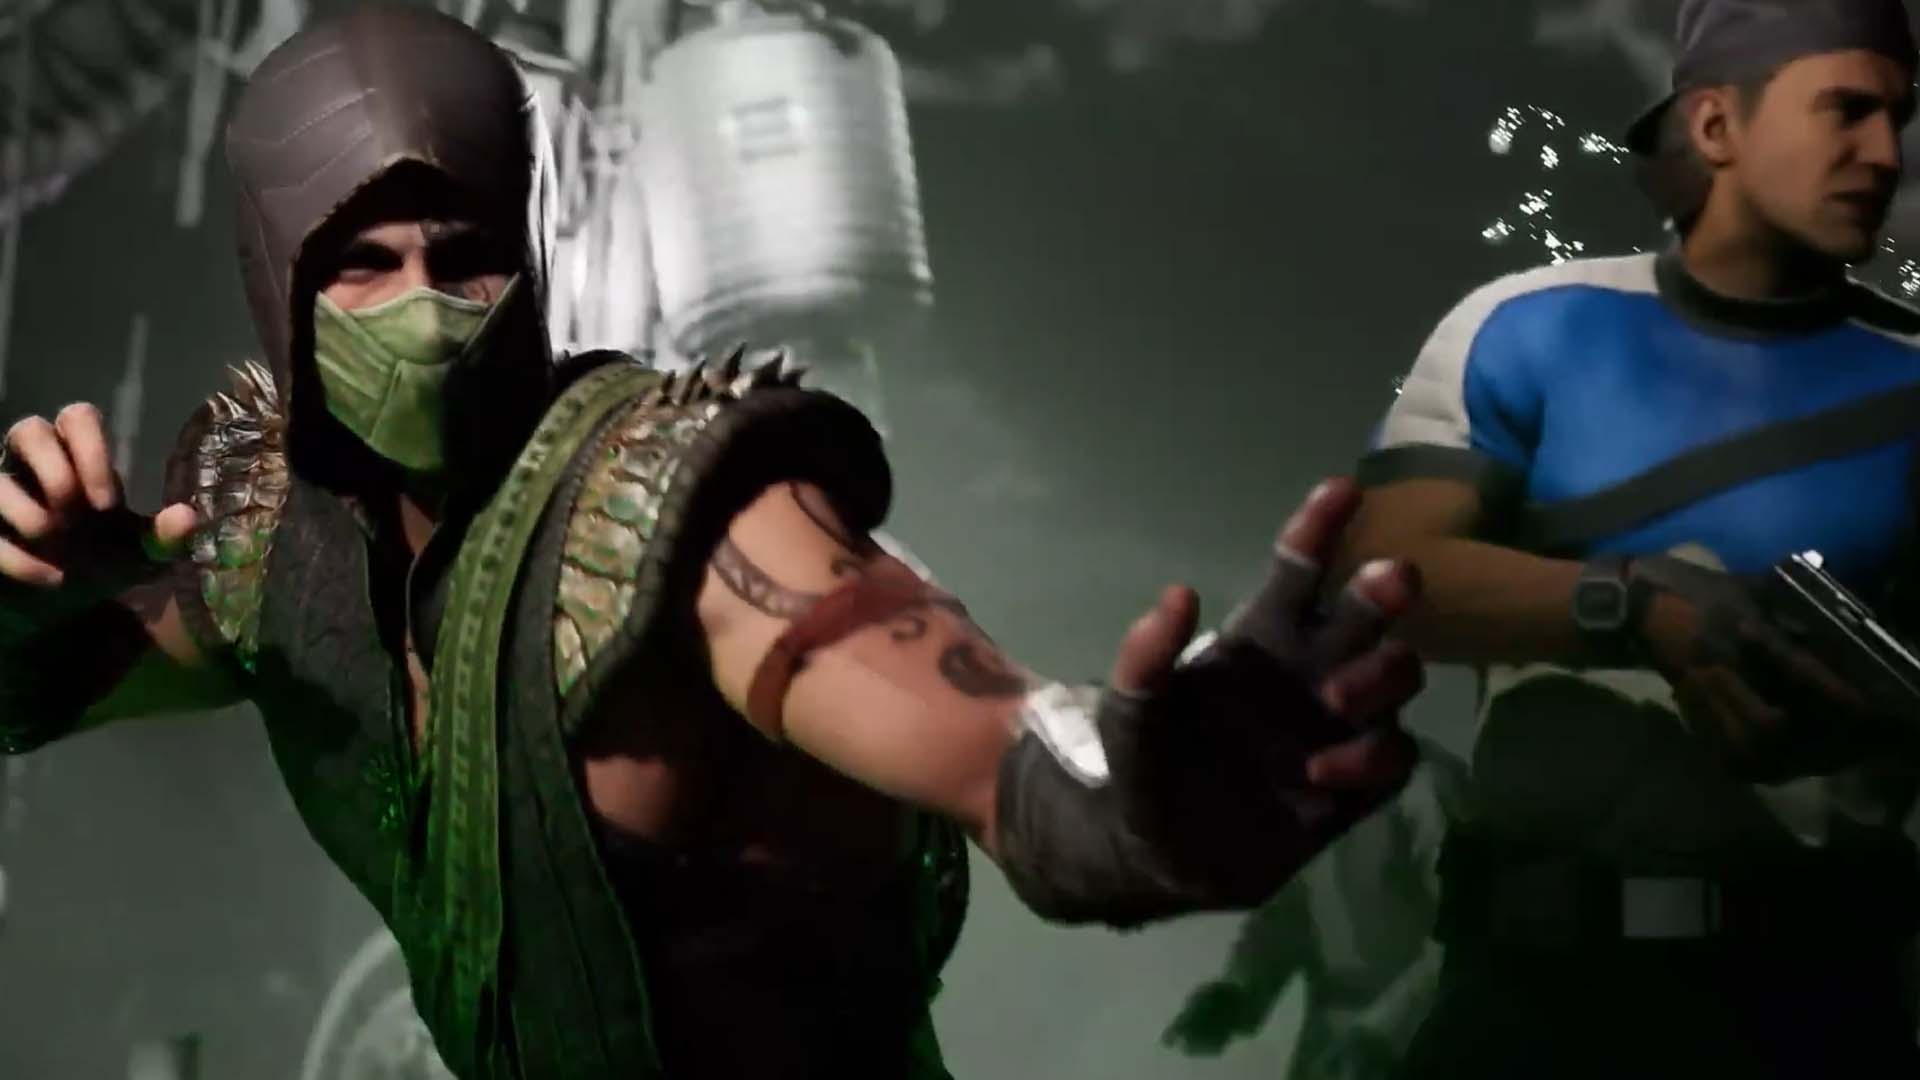 Mortal Kombat 1 impressions: A massive fighting game with a meaty story -  Polygon